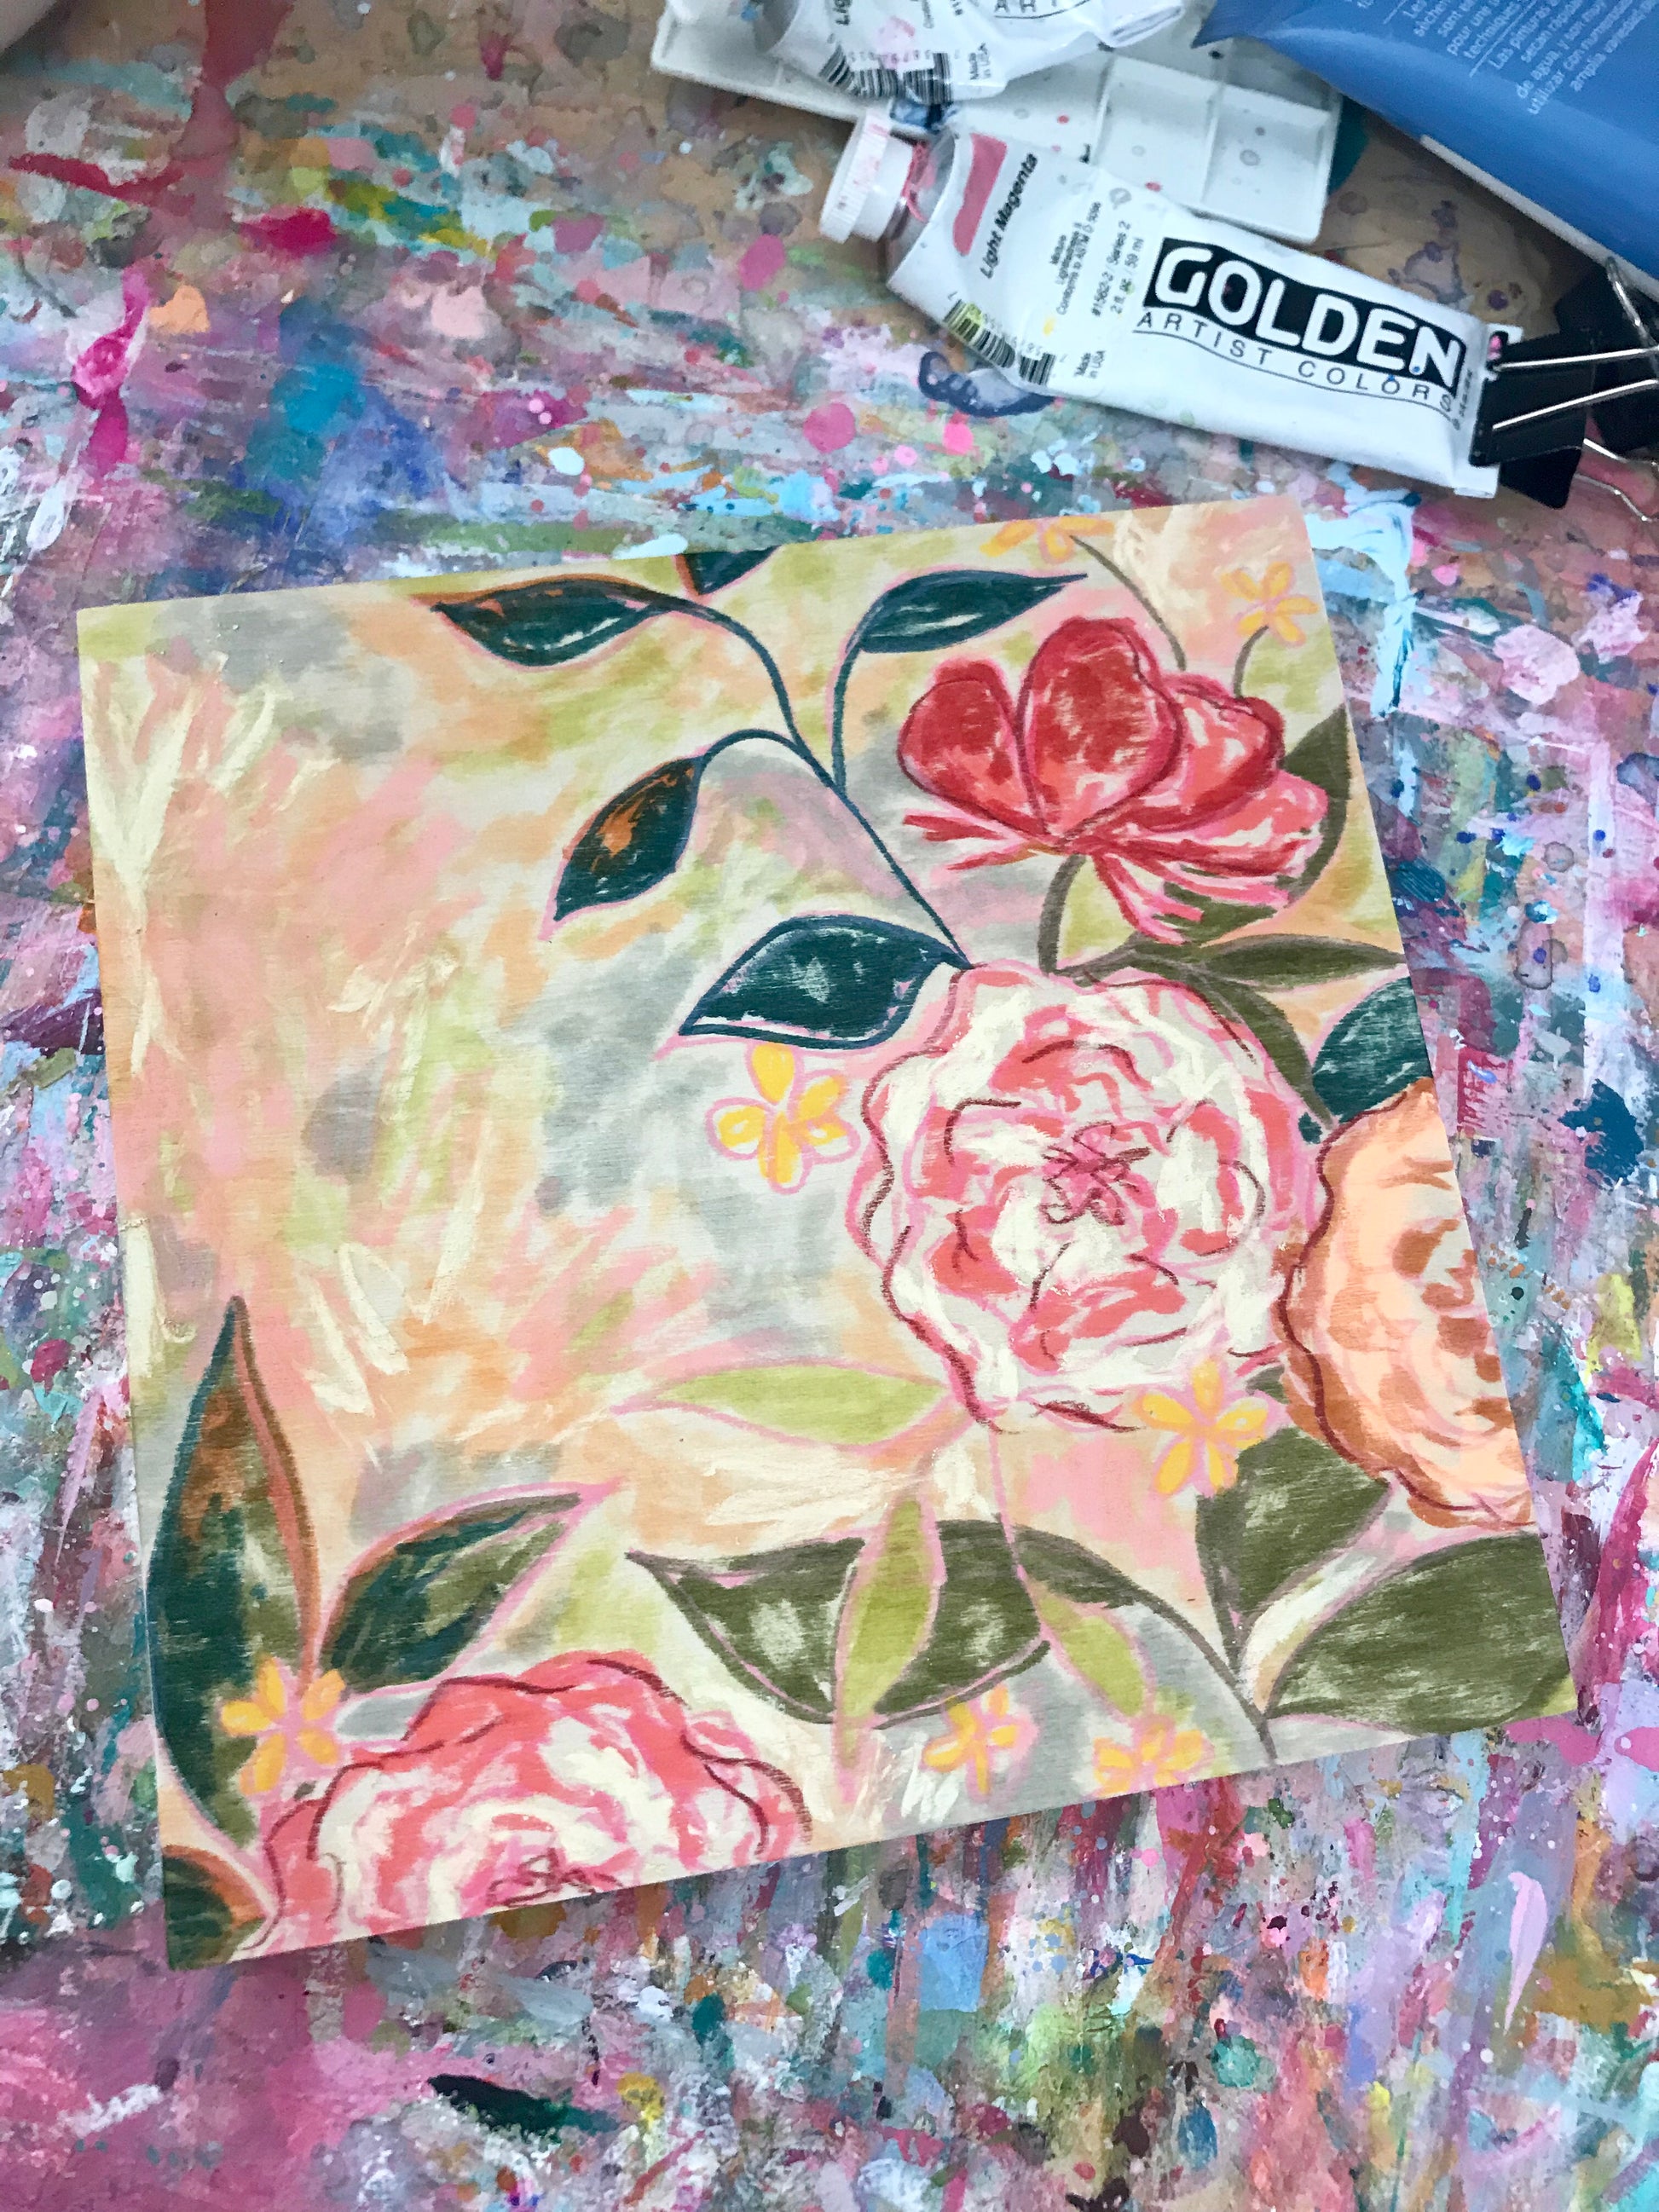 New Spring Floral Mixed Media Painting on 8x8 inch wood panel no.1 - Bethany Joy Art